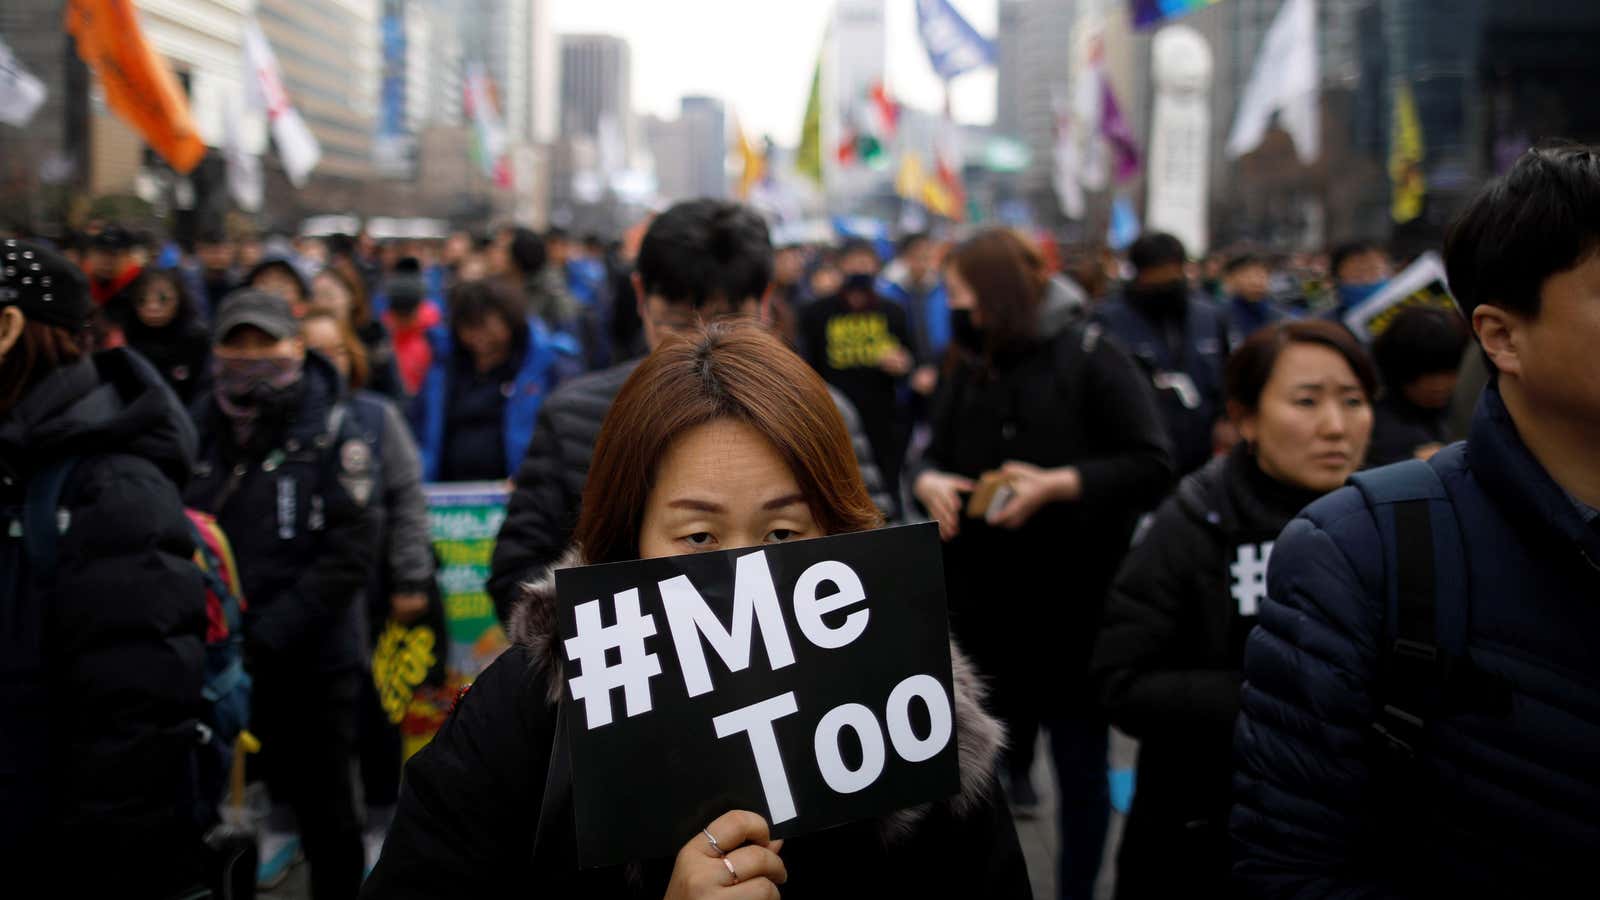 #MeToo means #YouToo: leaders must prepare for sexual harassment complaints.